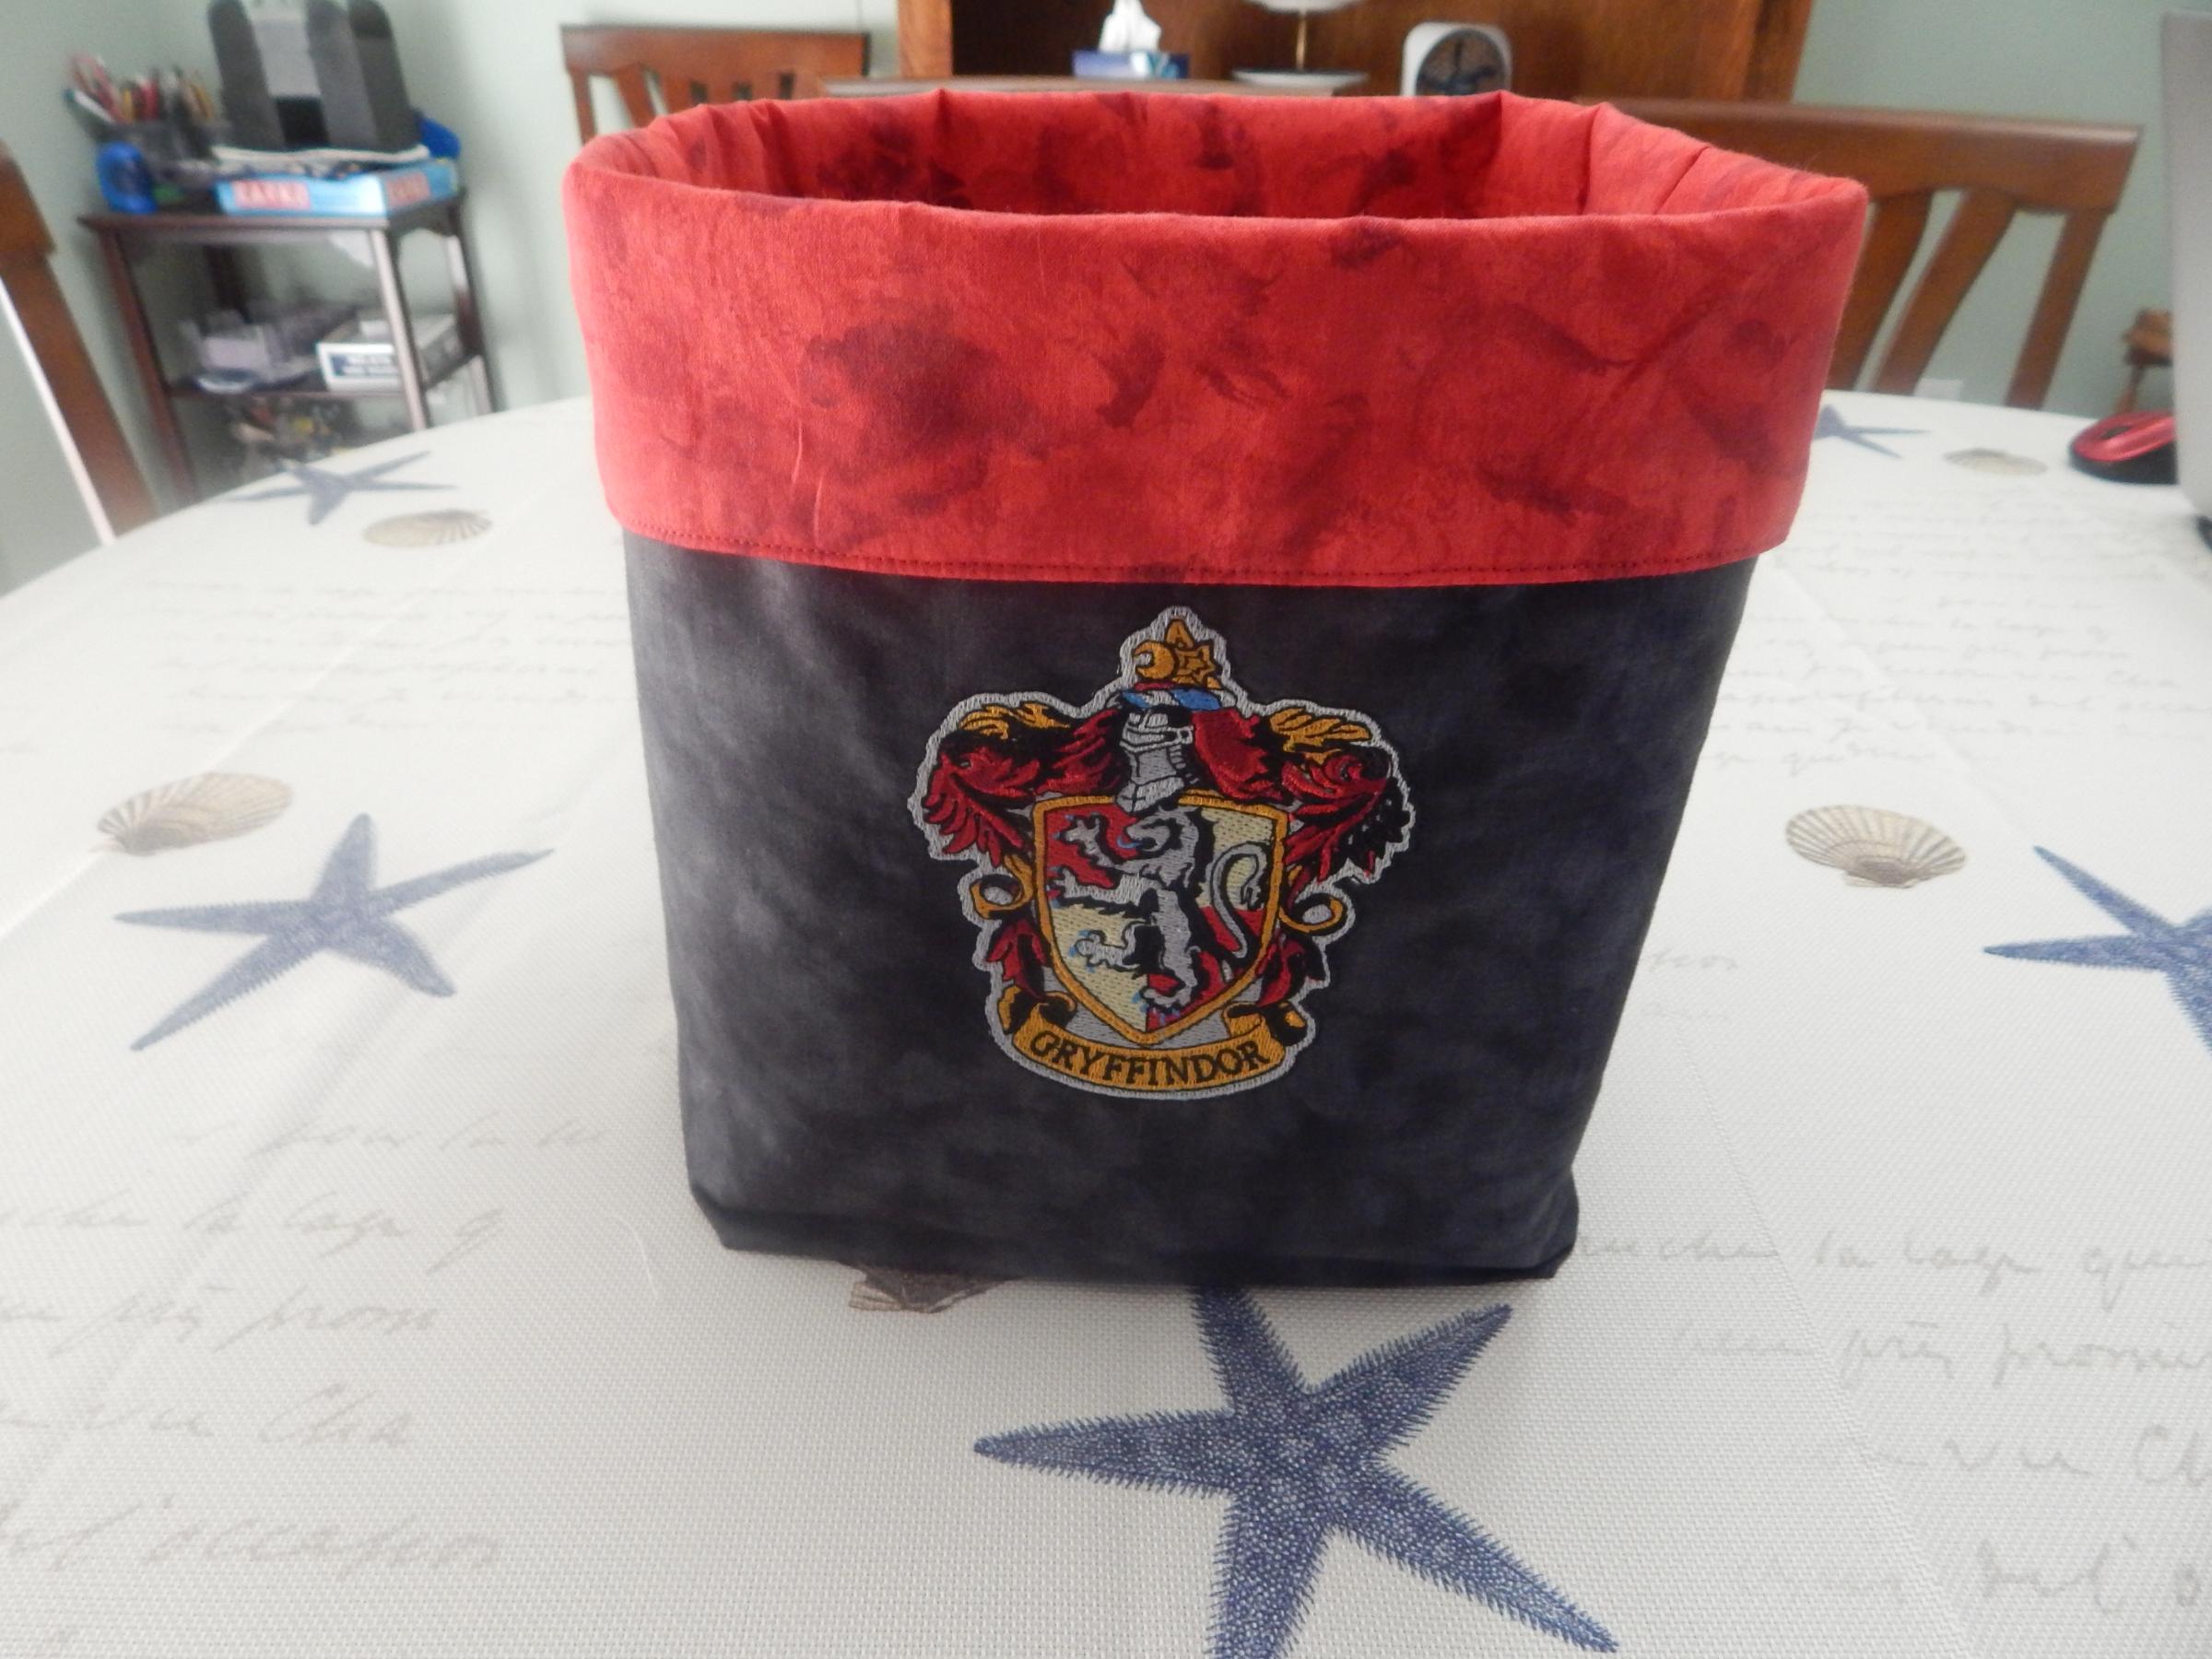 Embroidered textile box with Griffindor logo